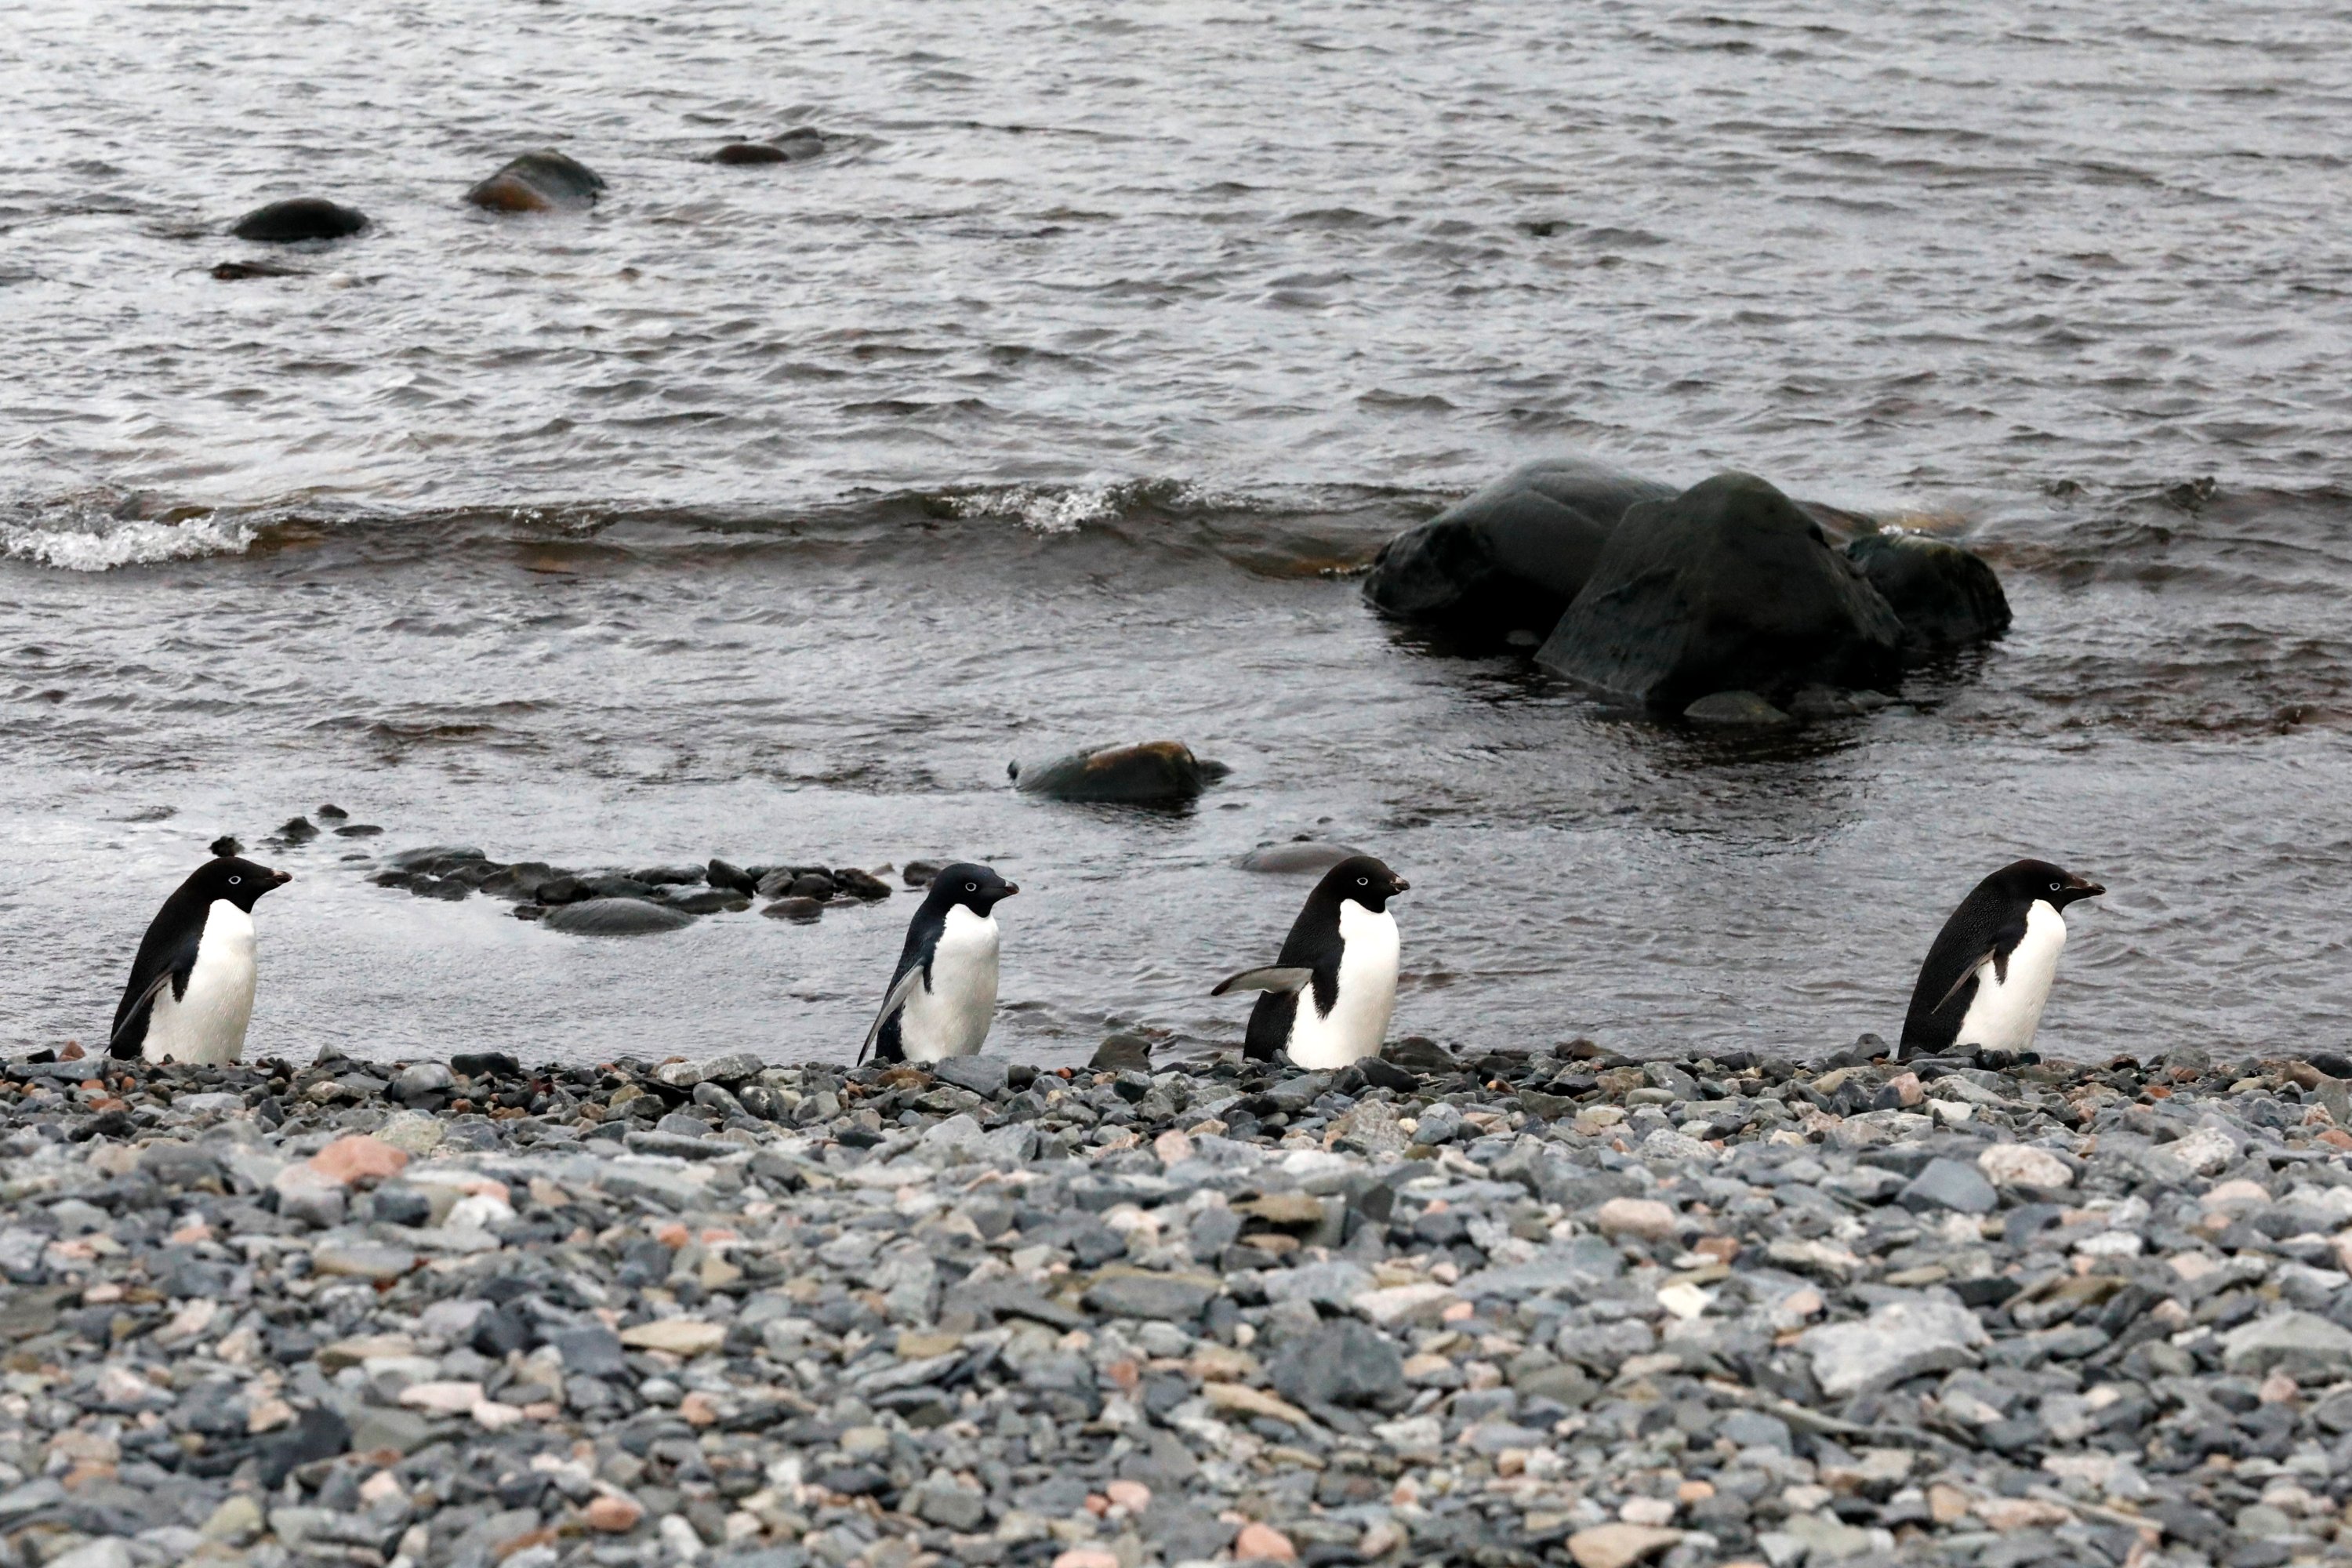 The team encountered many colonies of penguins throughout their trip. (Photo by Hayrettin Bektaş)